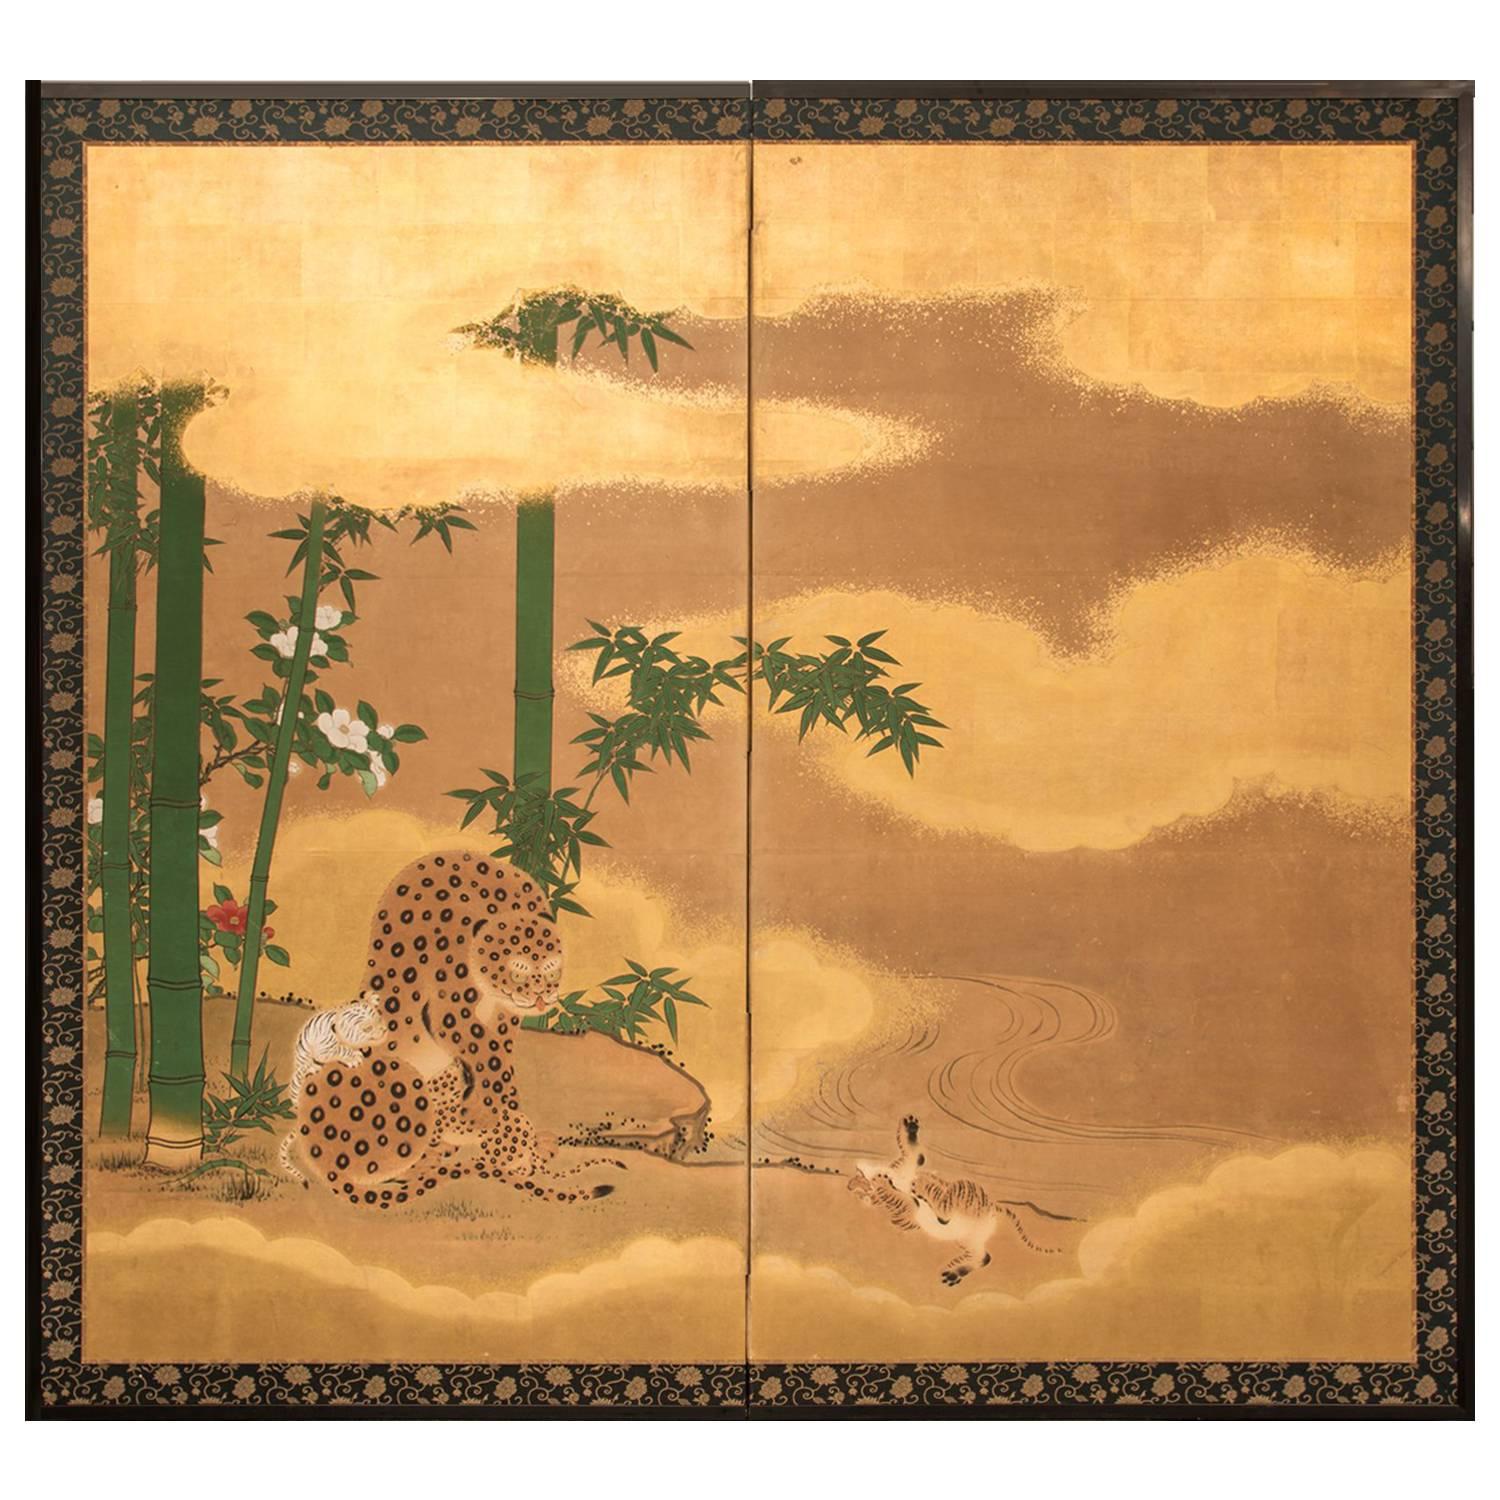 Japanese Two-Panel Screen "Leopard with Cubs" For Sale